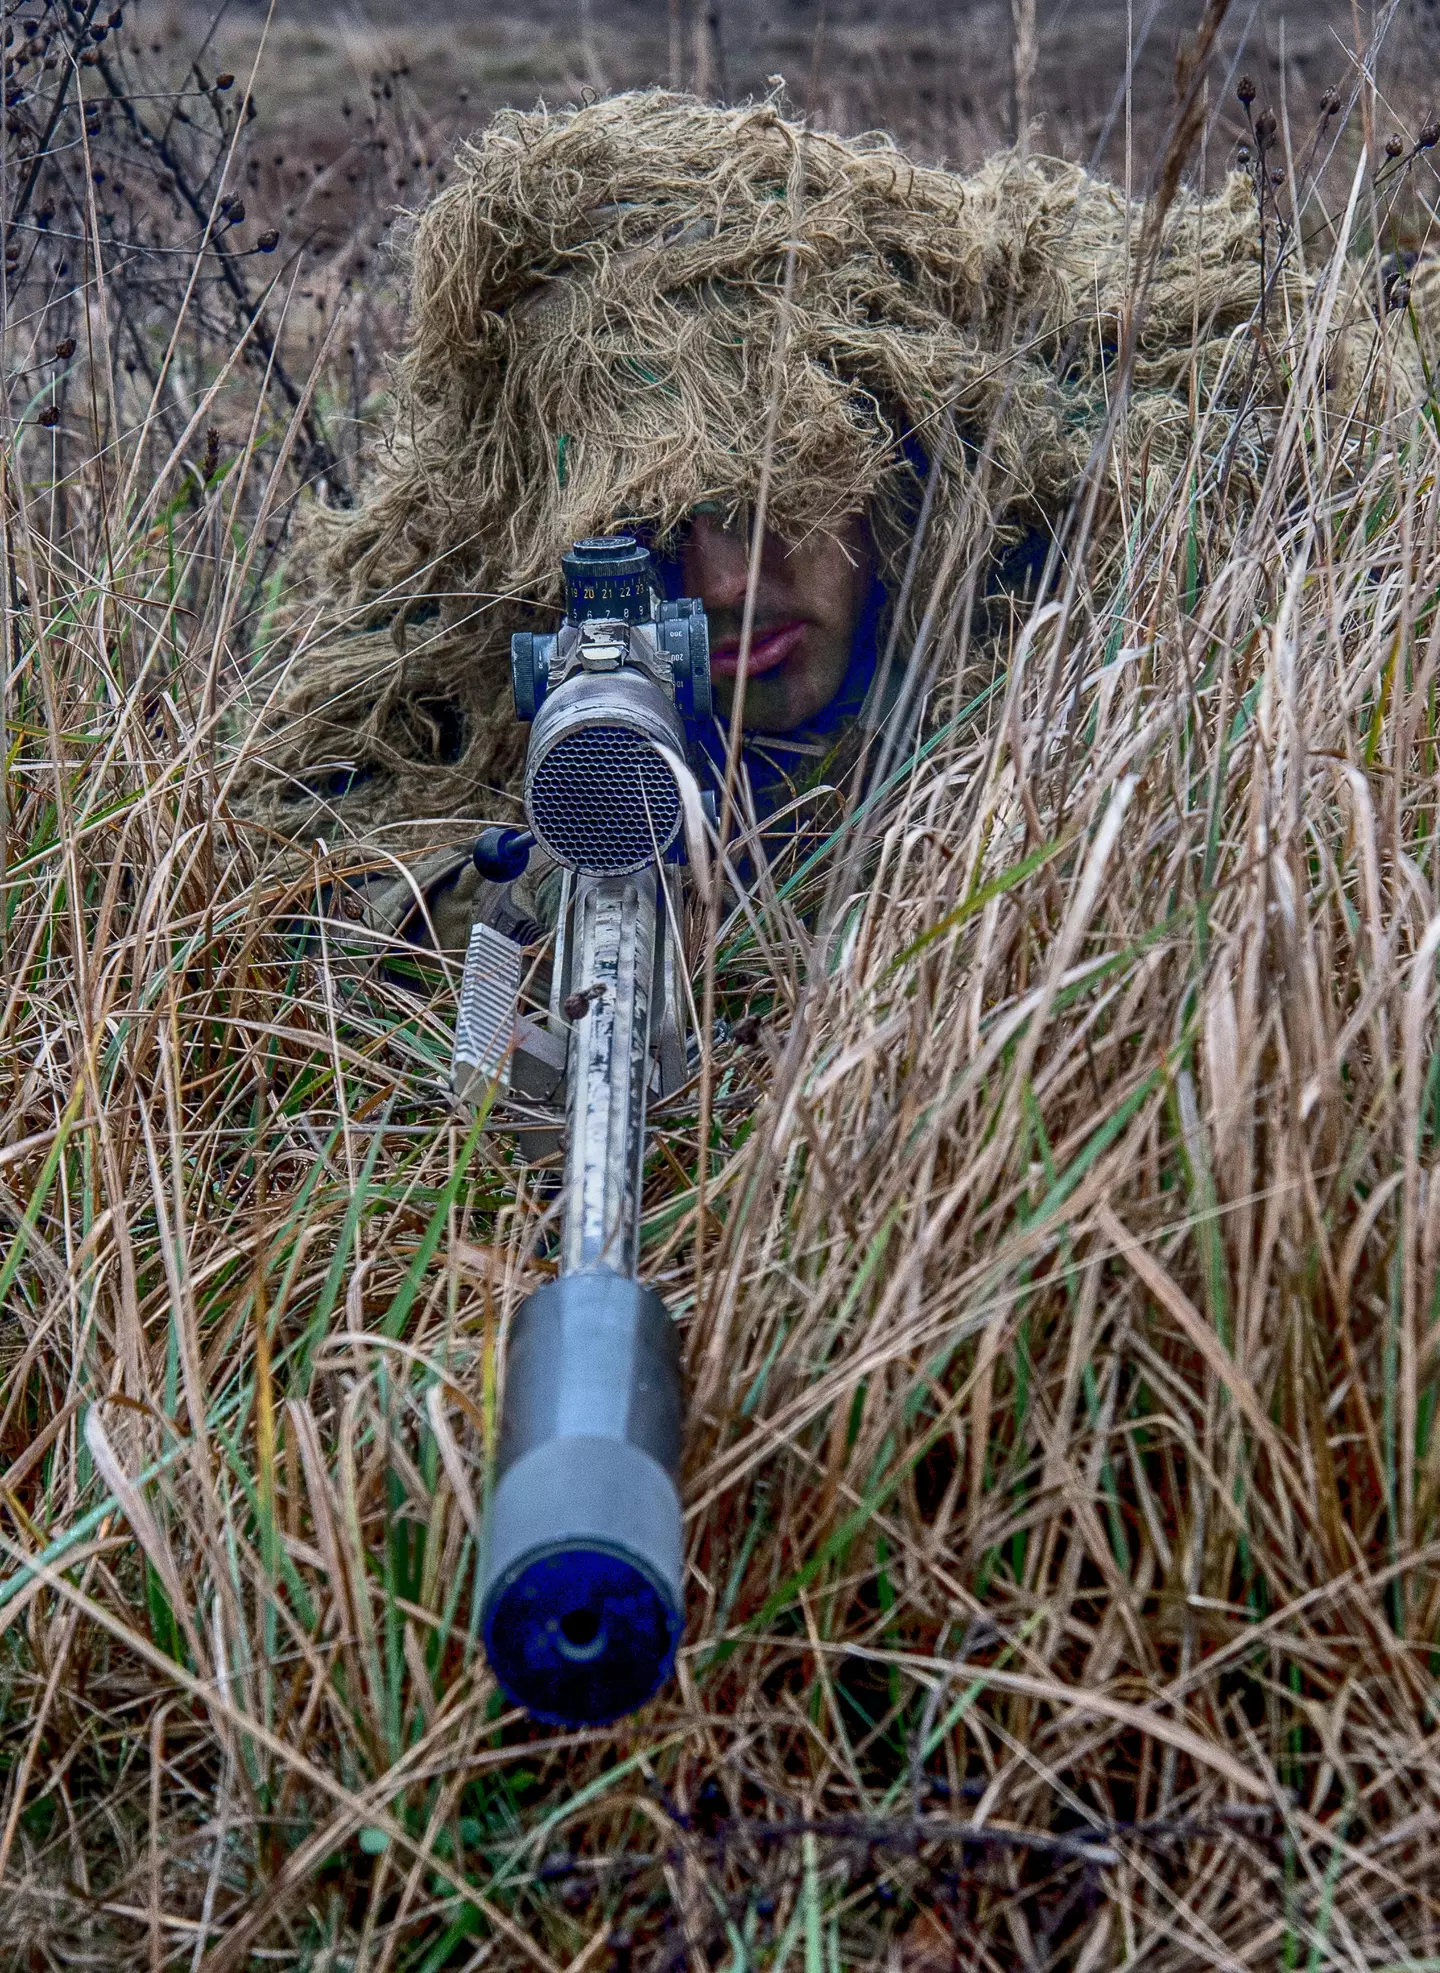 Snipers are adept at keeping themselves out of sight.